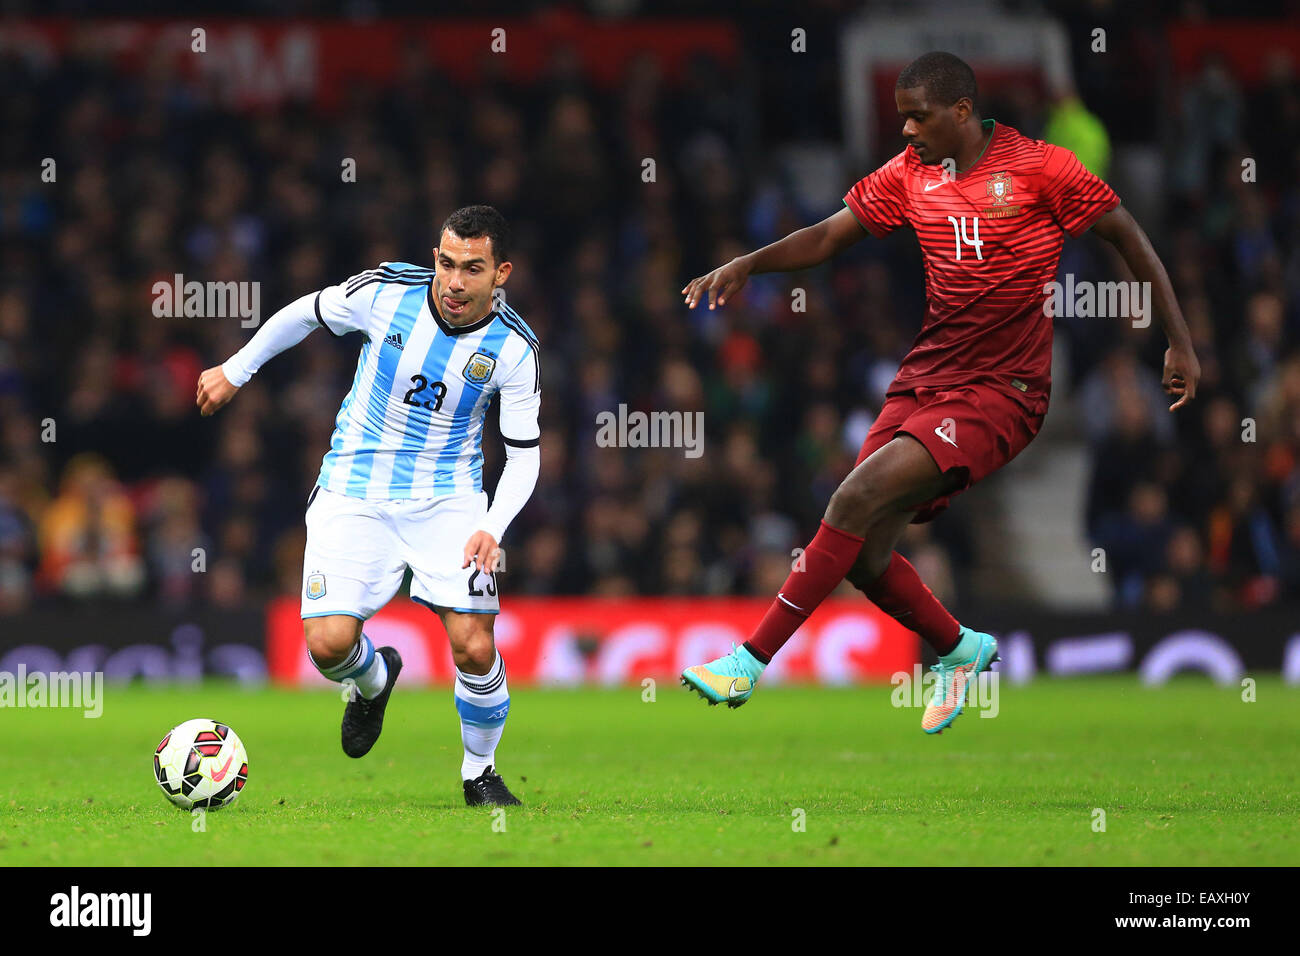 Nov. 18, 2014 - Manchester, United Kingdom - Carlos Tevez of Argentina and William Carvalho of Portugal - Argentina vs. Portugal - International Friendly - Old Trafford - Manchester - 18/11/2014 Pic Philip Oldham/Sportimage. Stock Photo